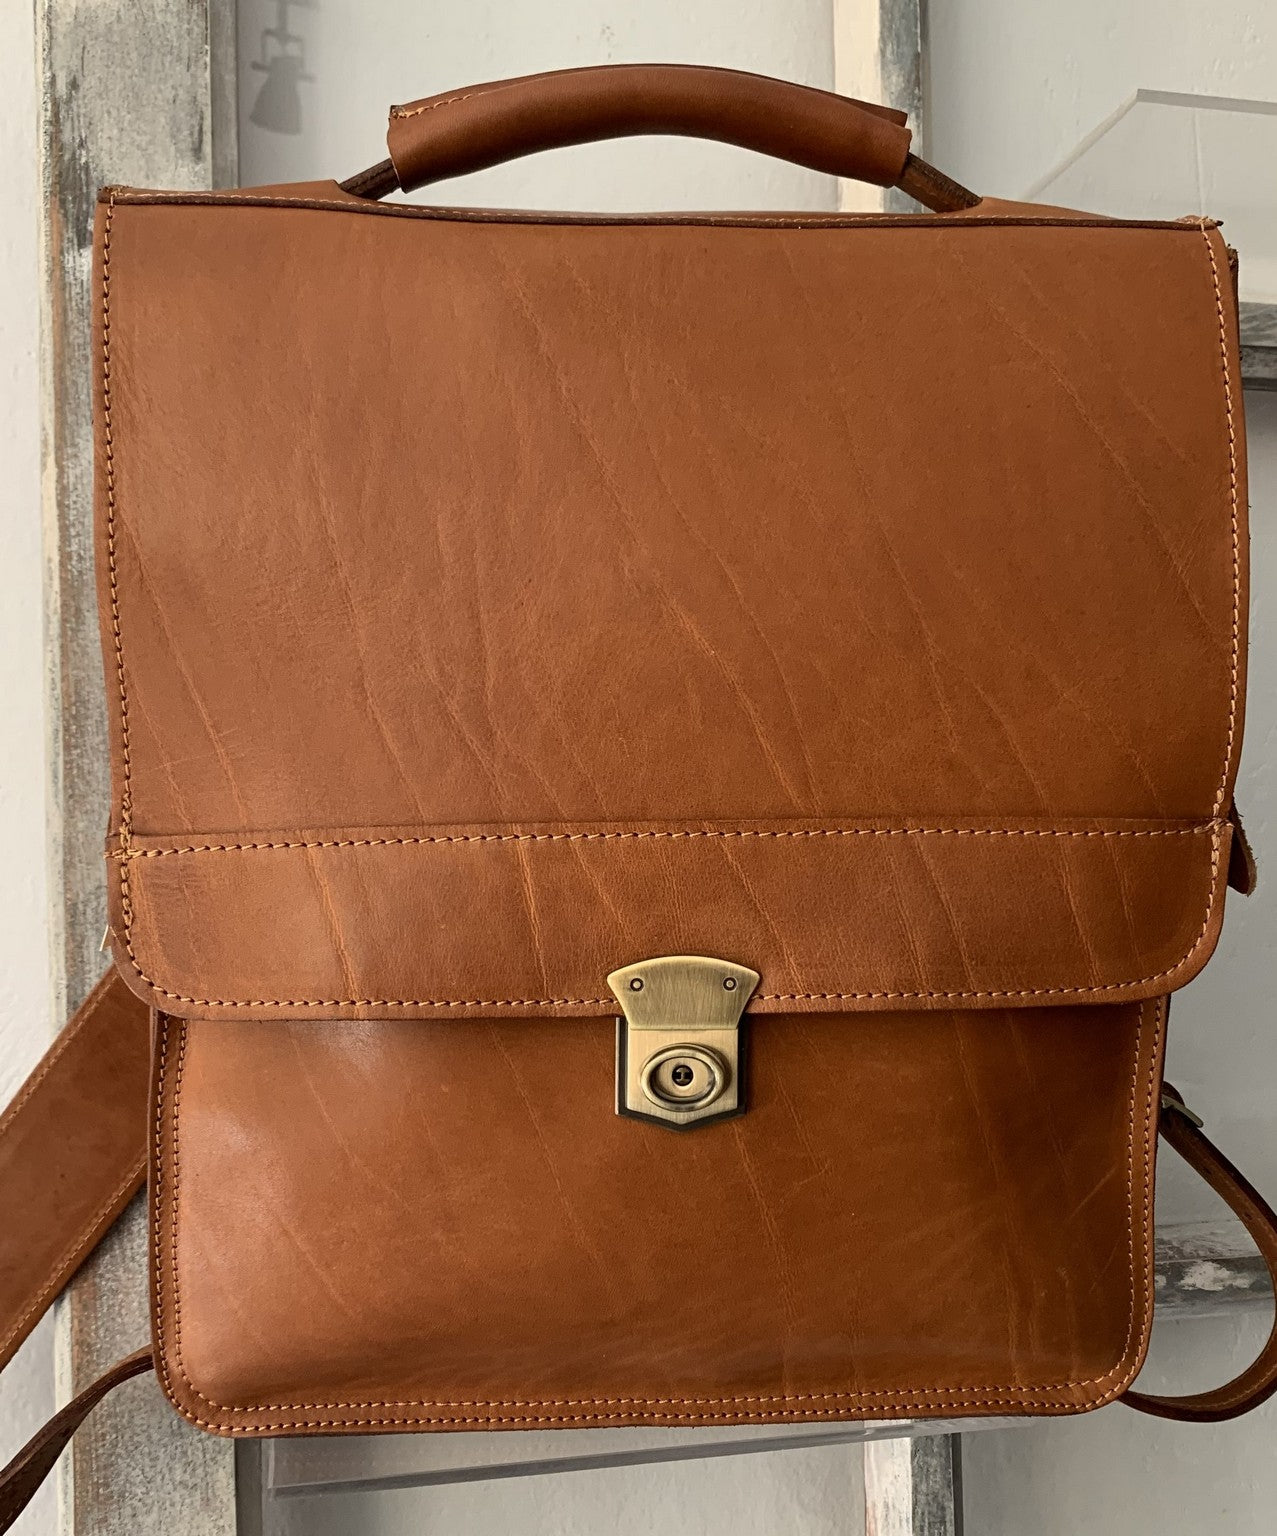 "Augeas" - Unisex crossbody and backpack bag handcrafted from natural light brown leather WT/79T